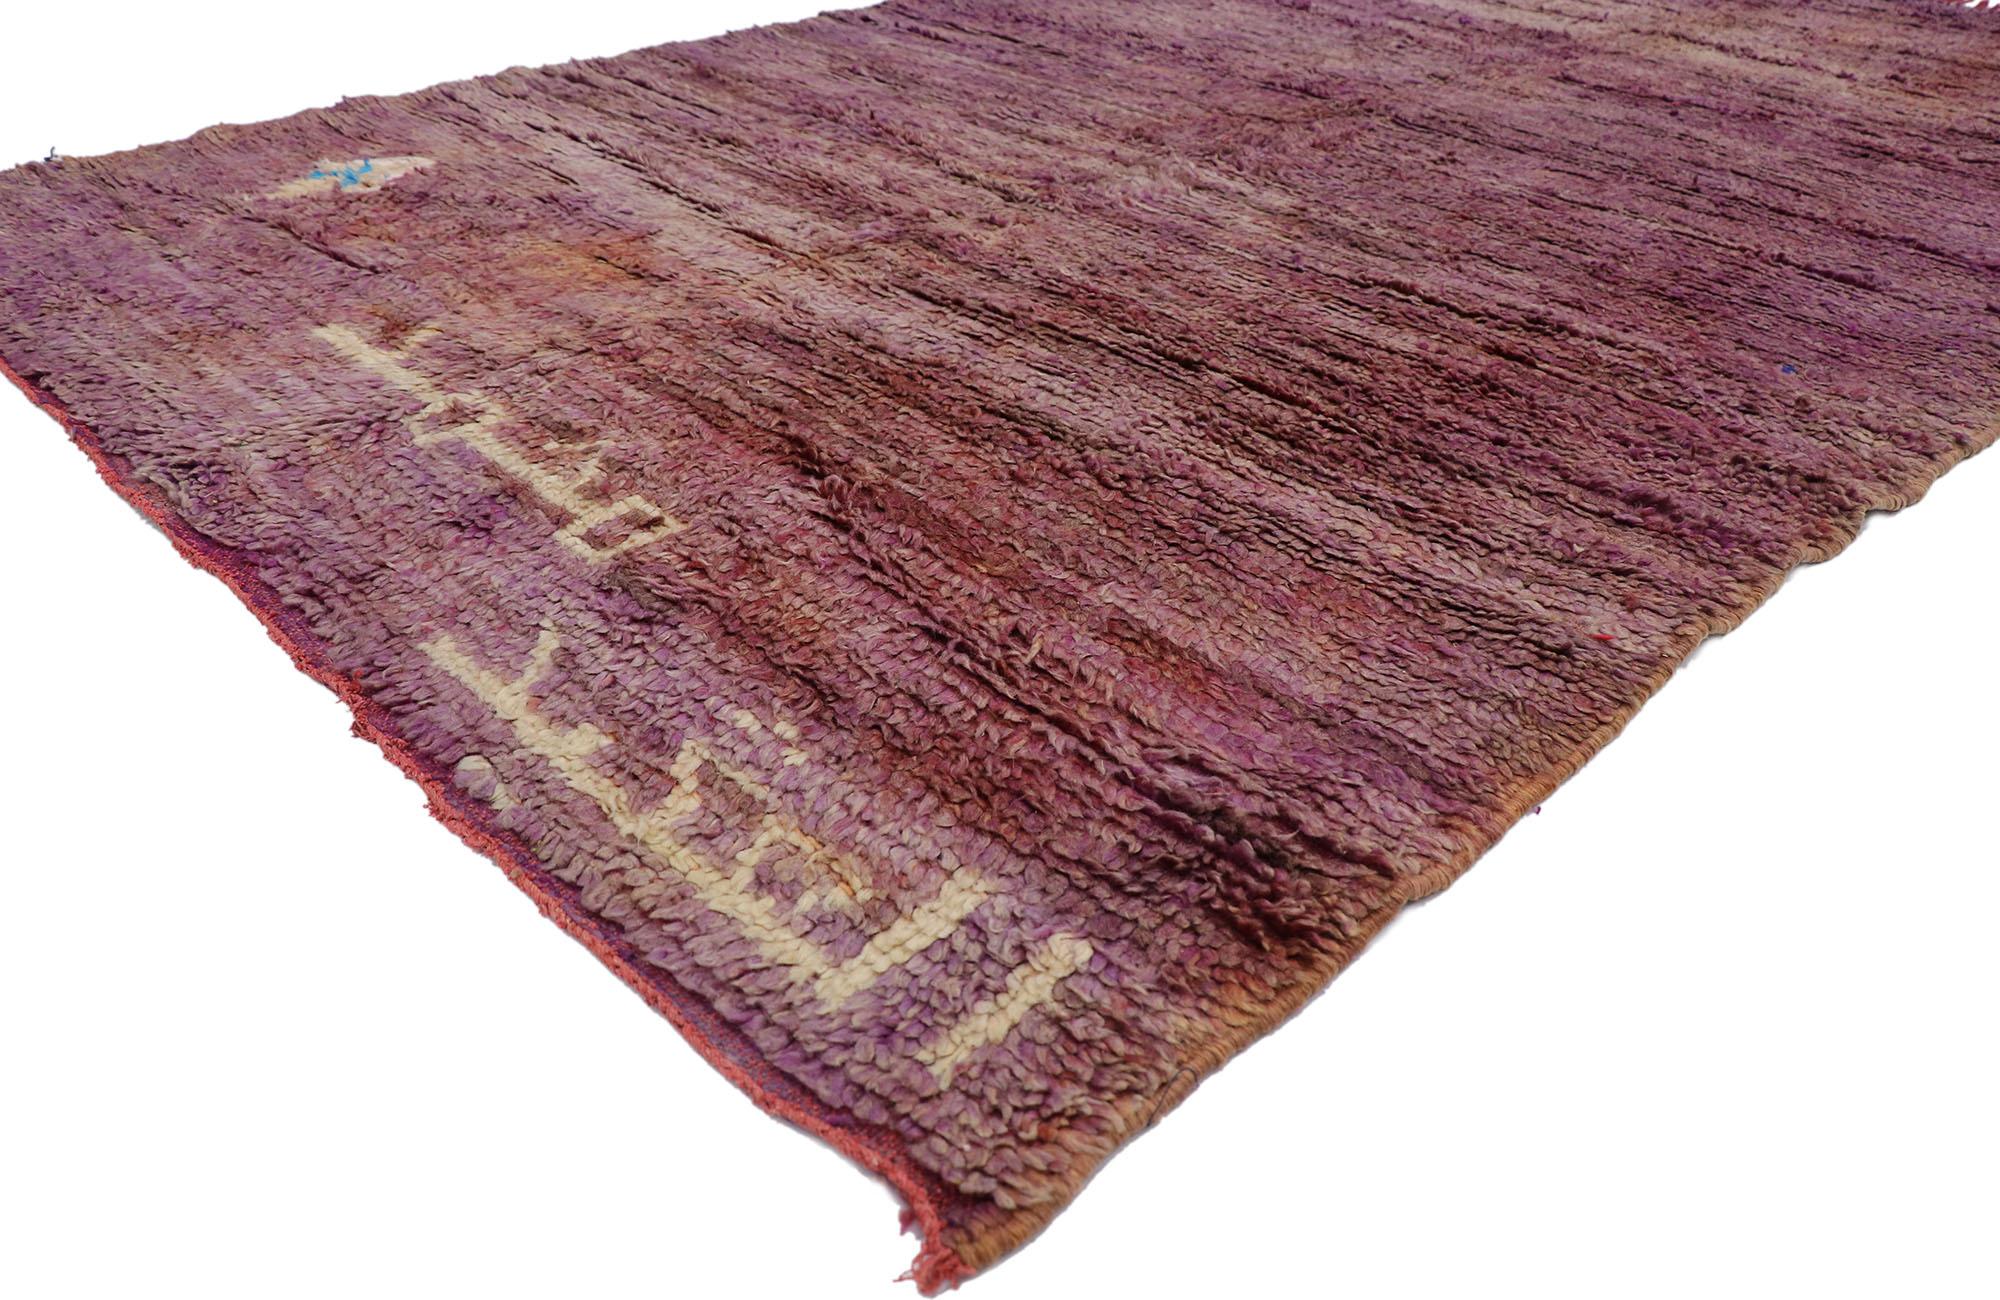 21424 Vintage Berber Moroccan rug with Bohemian Style 06'00 x 10'00. With its simplicity, plush pile and Bohemian vibes, this hand knotted wool vintage Berber Moroccan rug is a captivating vision of woven beauty. Imbued with rust and purple hues,